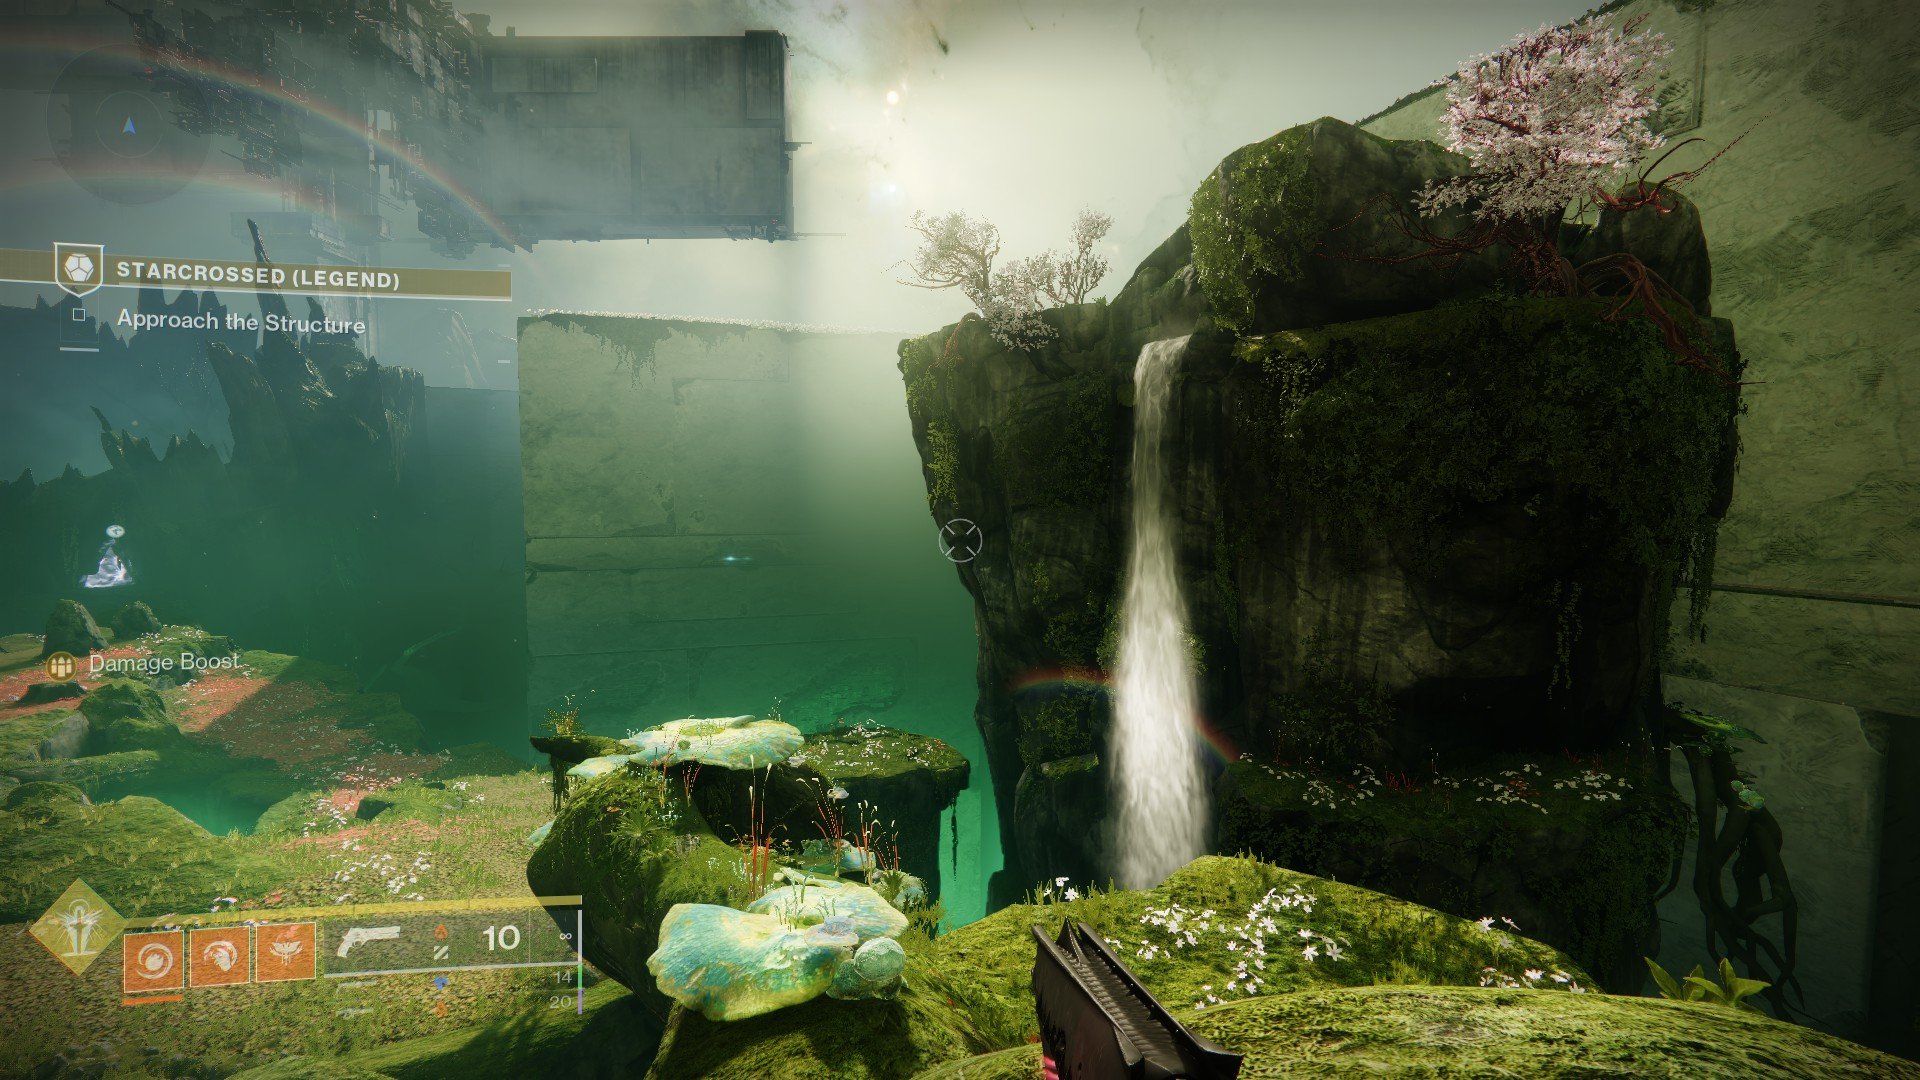 A cliff in the Black Garden with a waterfall on it. The dragon icon from Last Wish is visible on the left side of the screen.